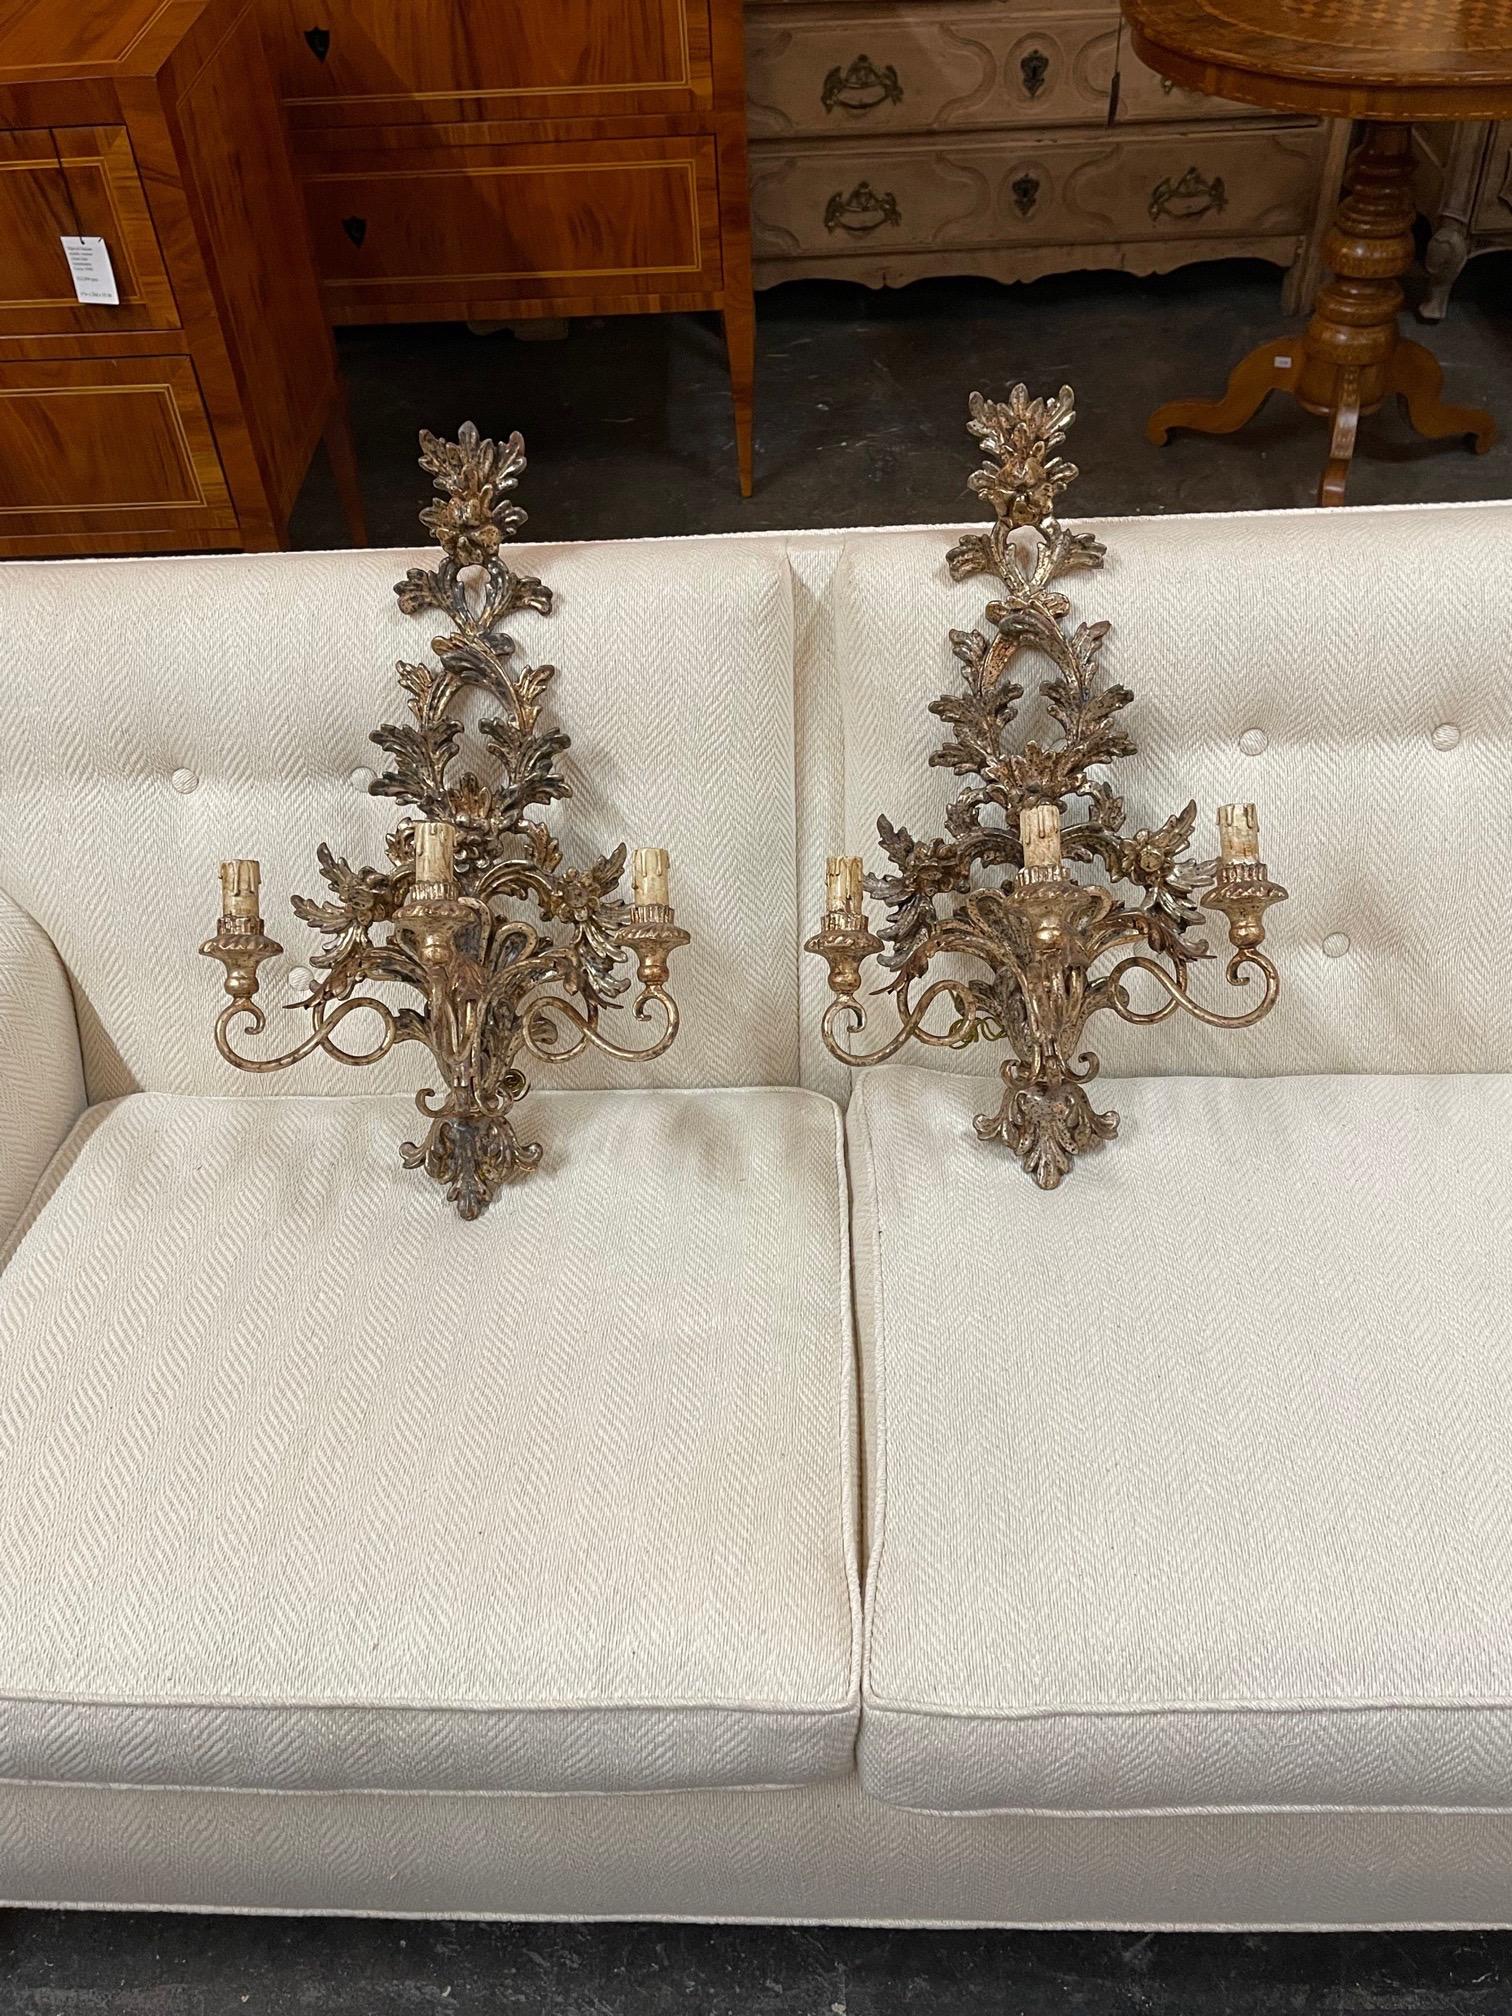 Elegant pair of Italian carved wood and polychromed wall sconces with 3 lights. Nicely carved and lovely scale and shape. A fine pair!